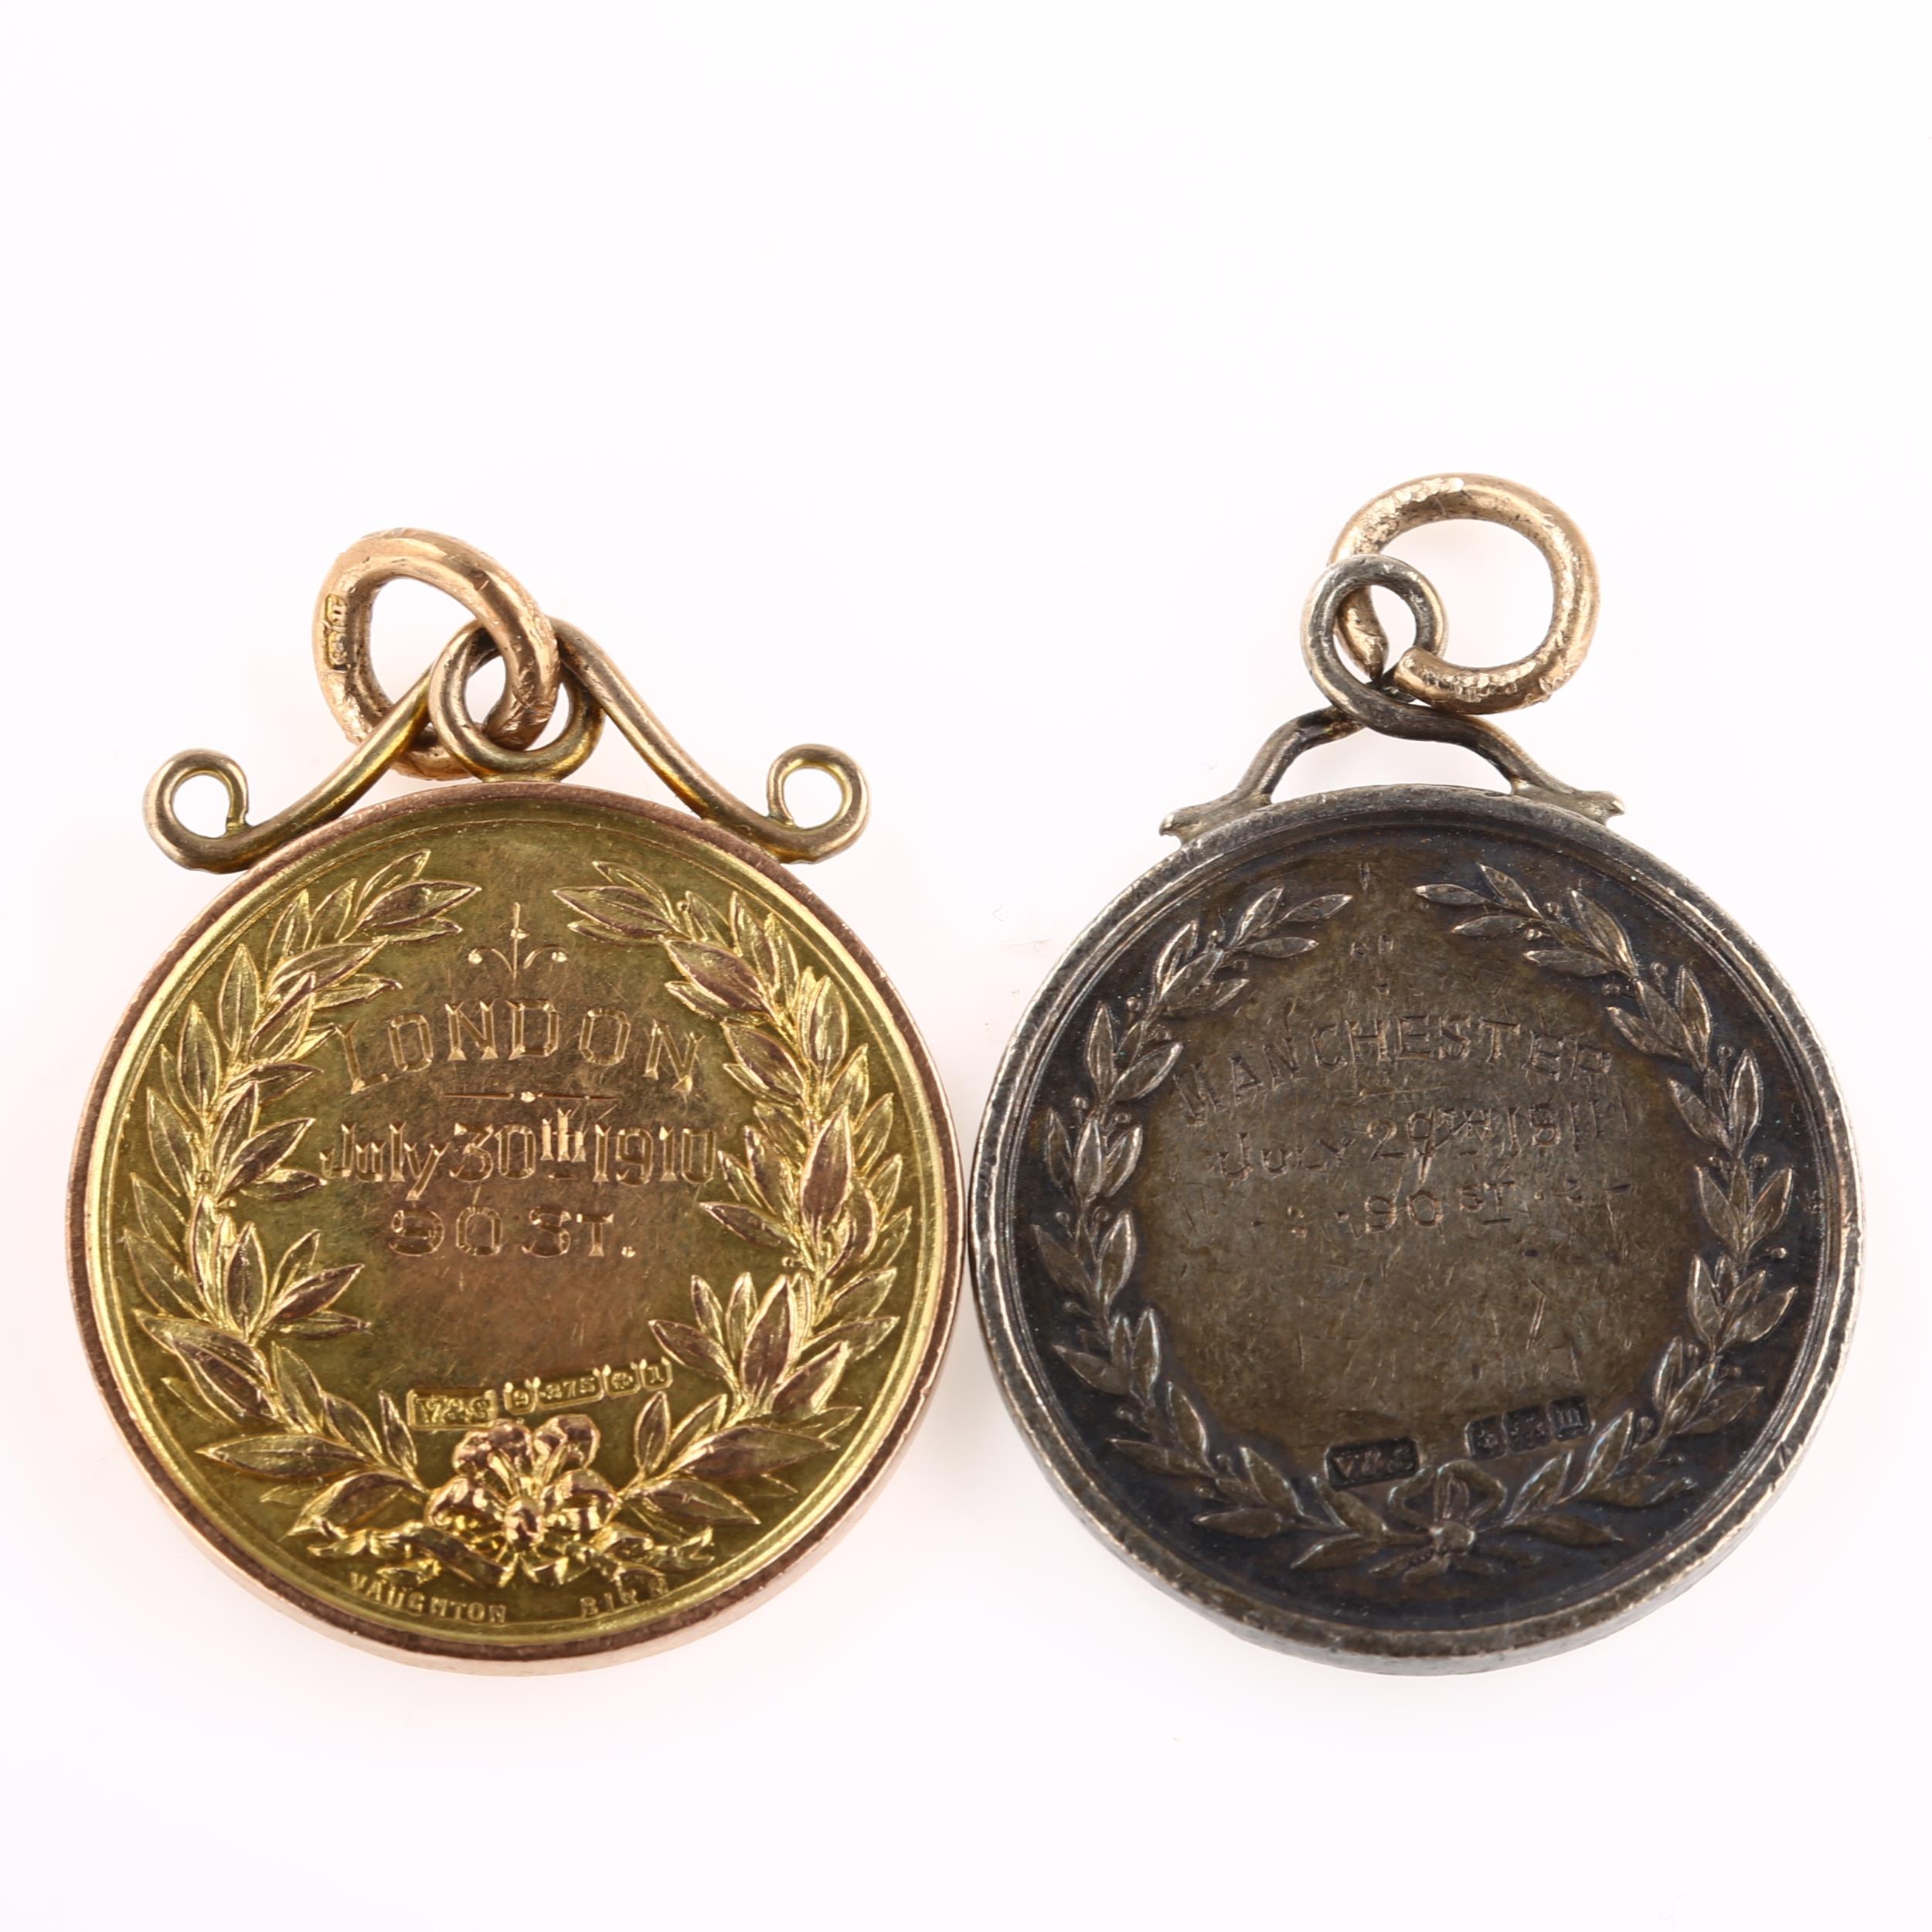 2 early 20th century Amateur Athletic Association Tug-of-War Championship medals, comprising 9ct - Image 3 of 4